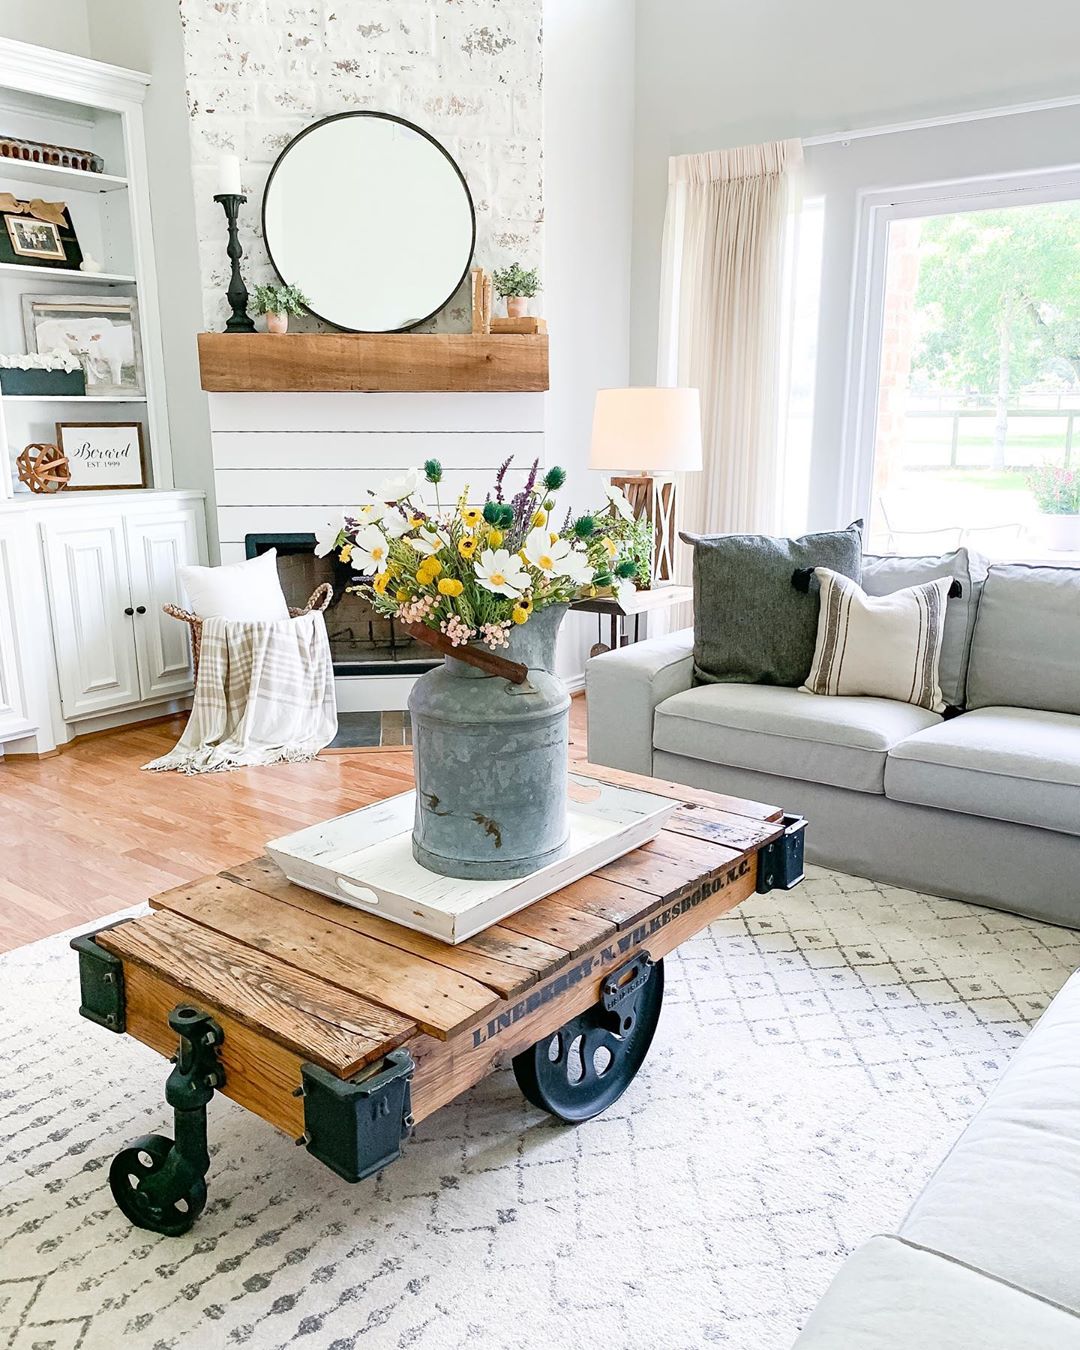 Vintage farmhouse-style living room. Photo by Instagram user @rusticpigdesigns